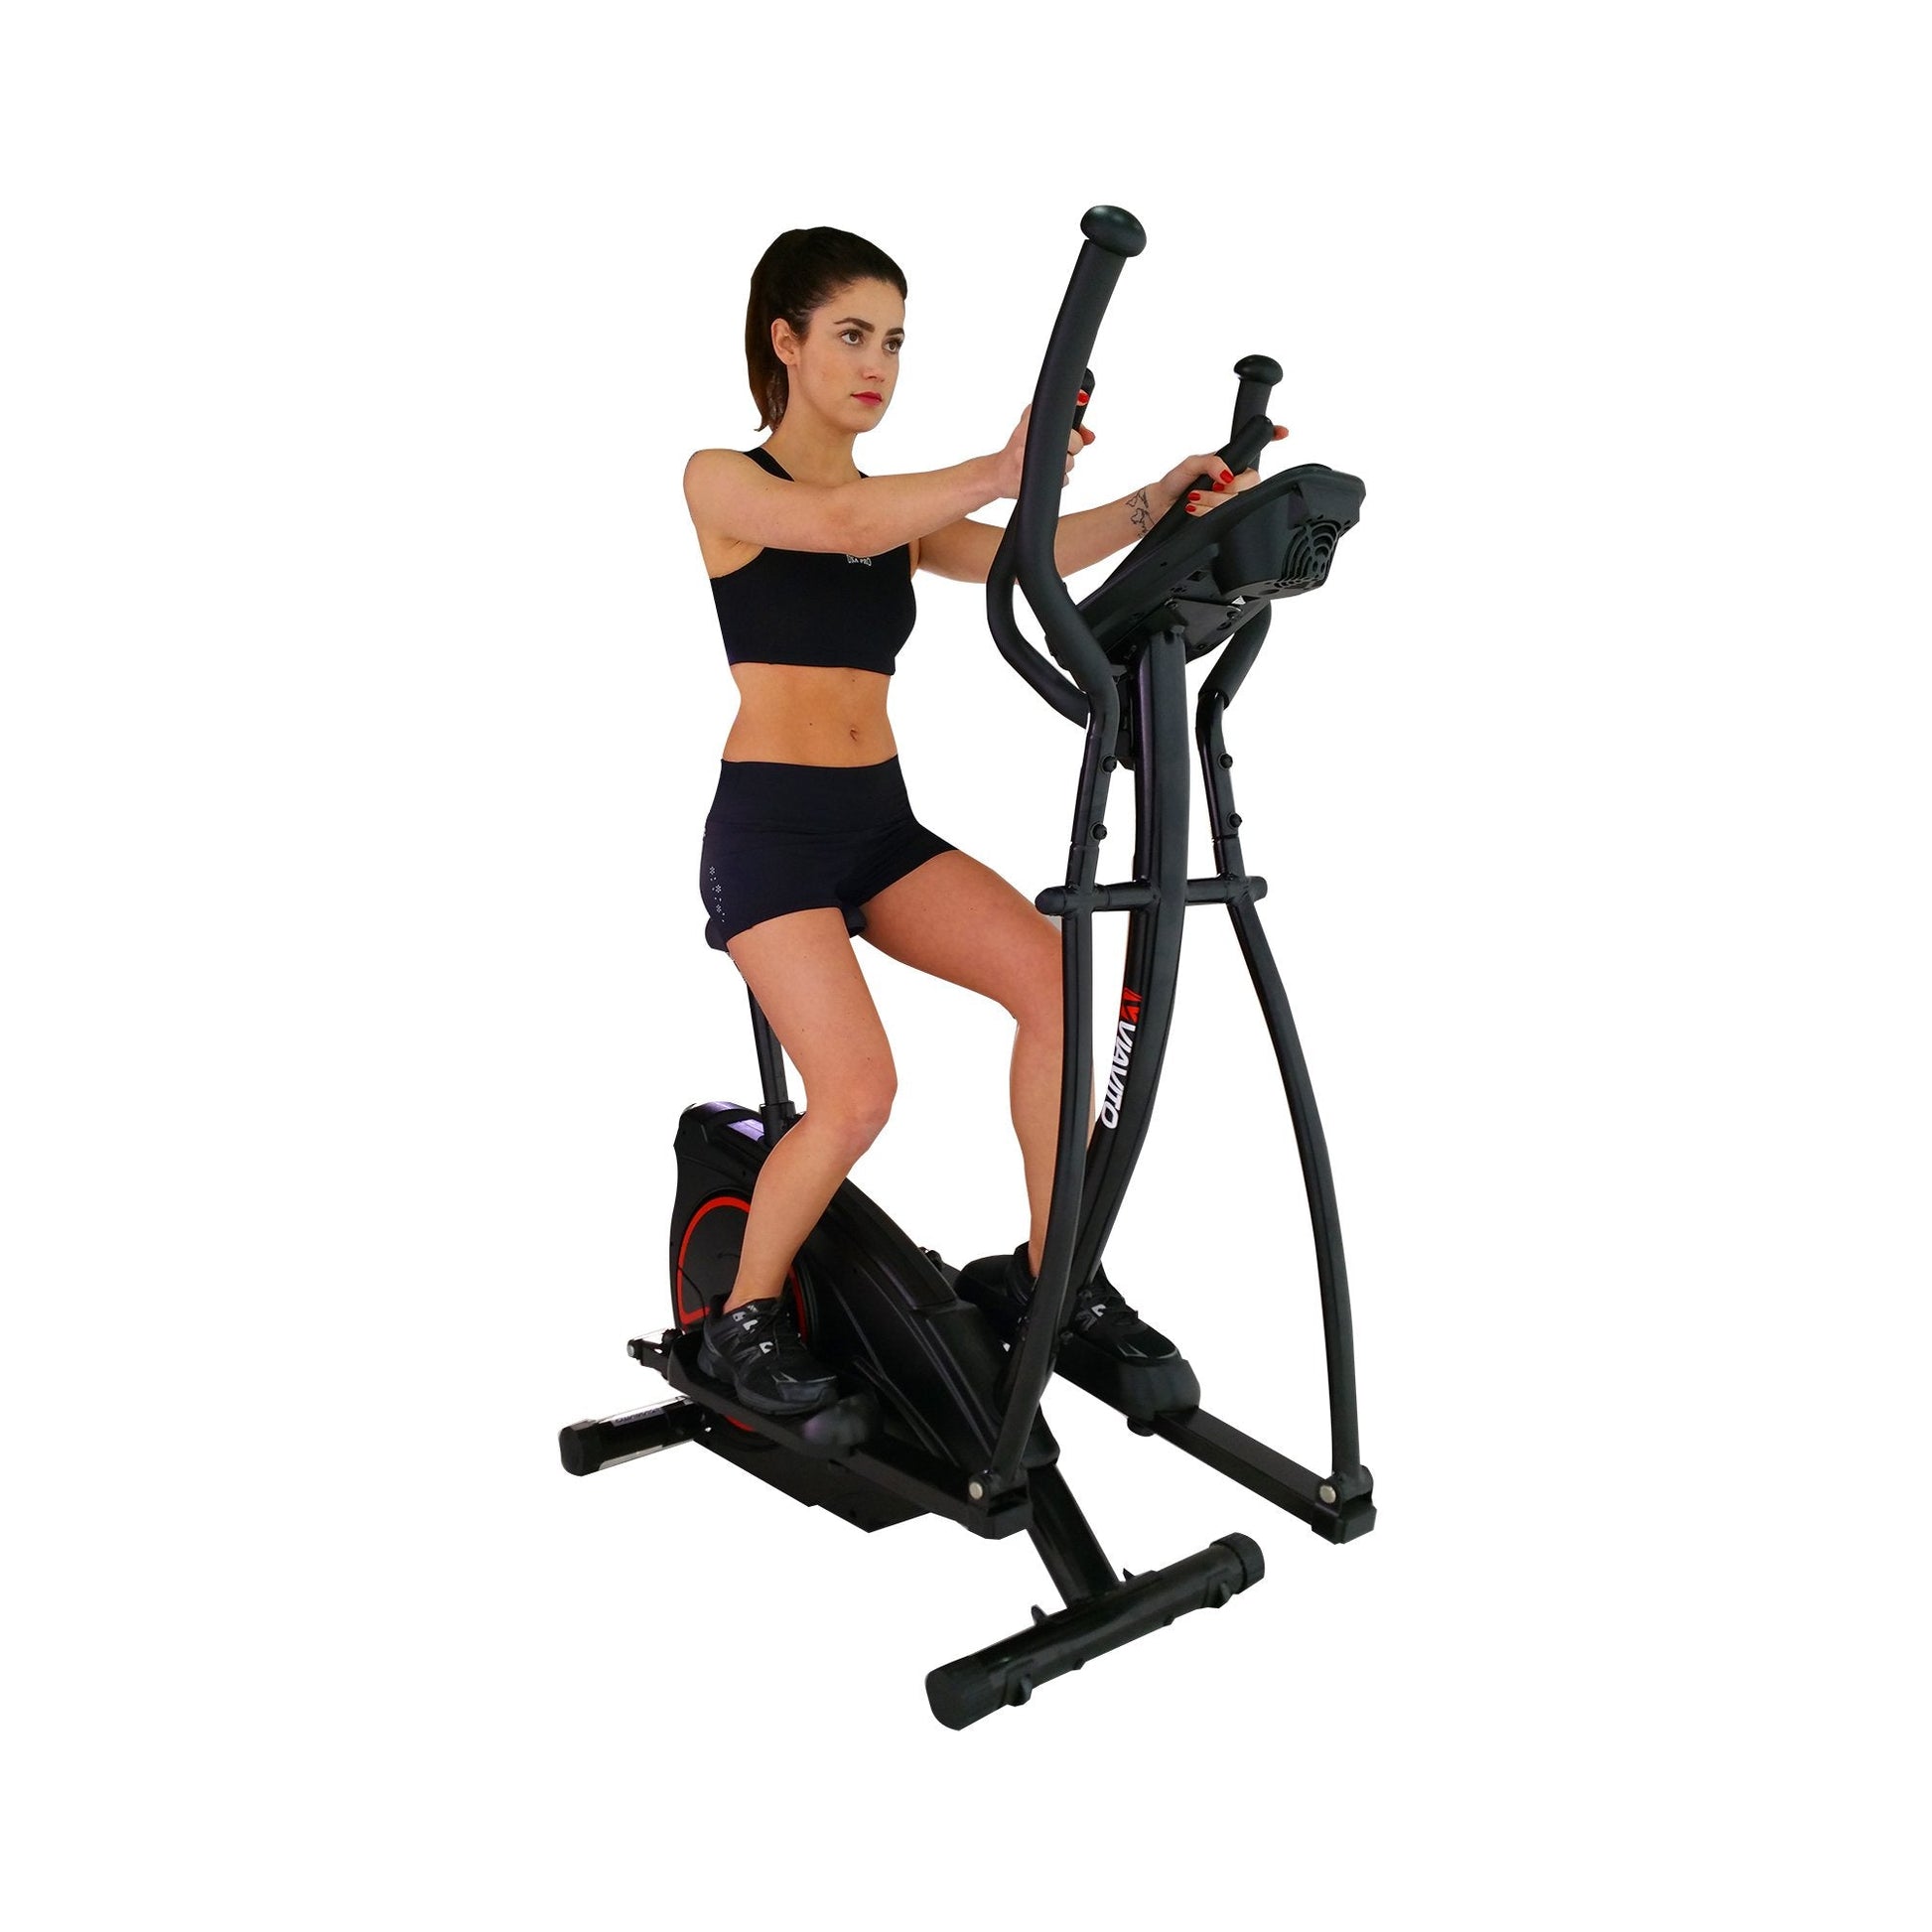 |Viavito Setry 2 in 1 Elliptical Trainer &amp; Exercise Bike - In Use - 4|